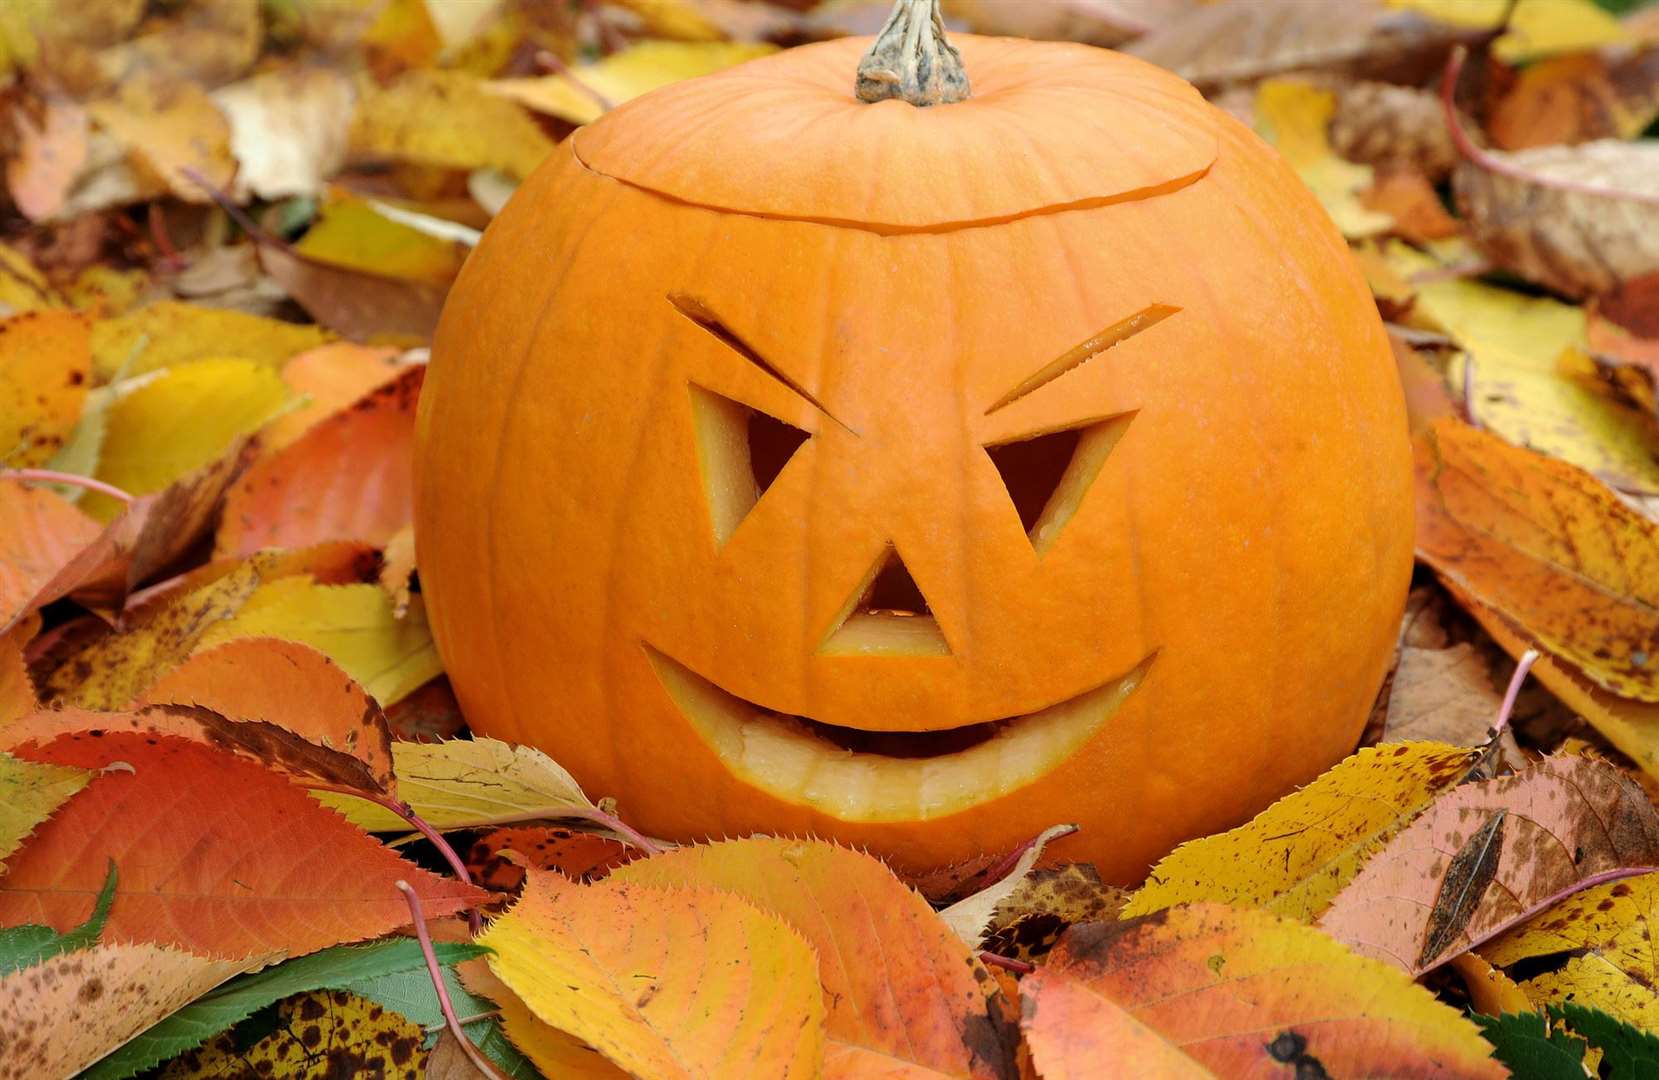 Aberdeenshire Council is hoping to reduce the food waste problem this Halloween by asking residents to put pen to pumpkin and consume their gourds instead of carving them this year.